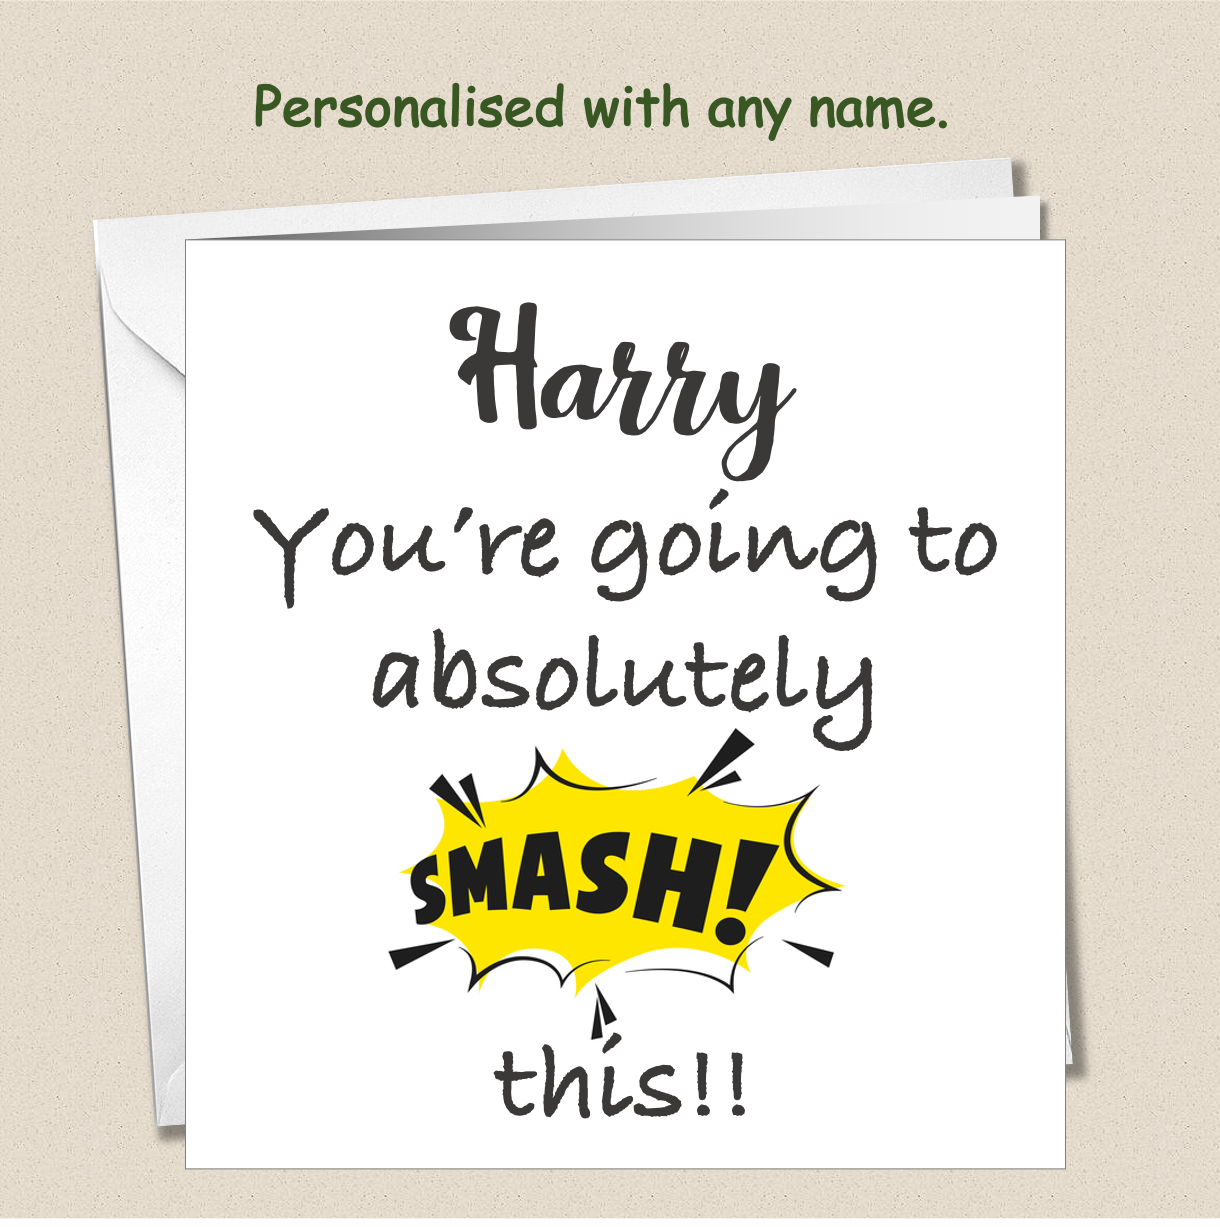 Personalised Good Luck card - You're going to Smash this